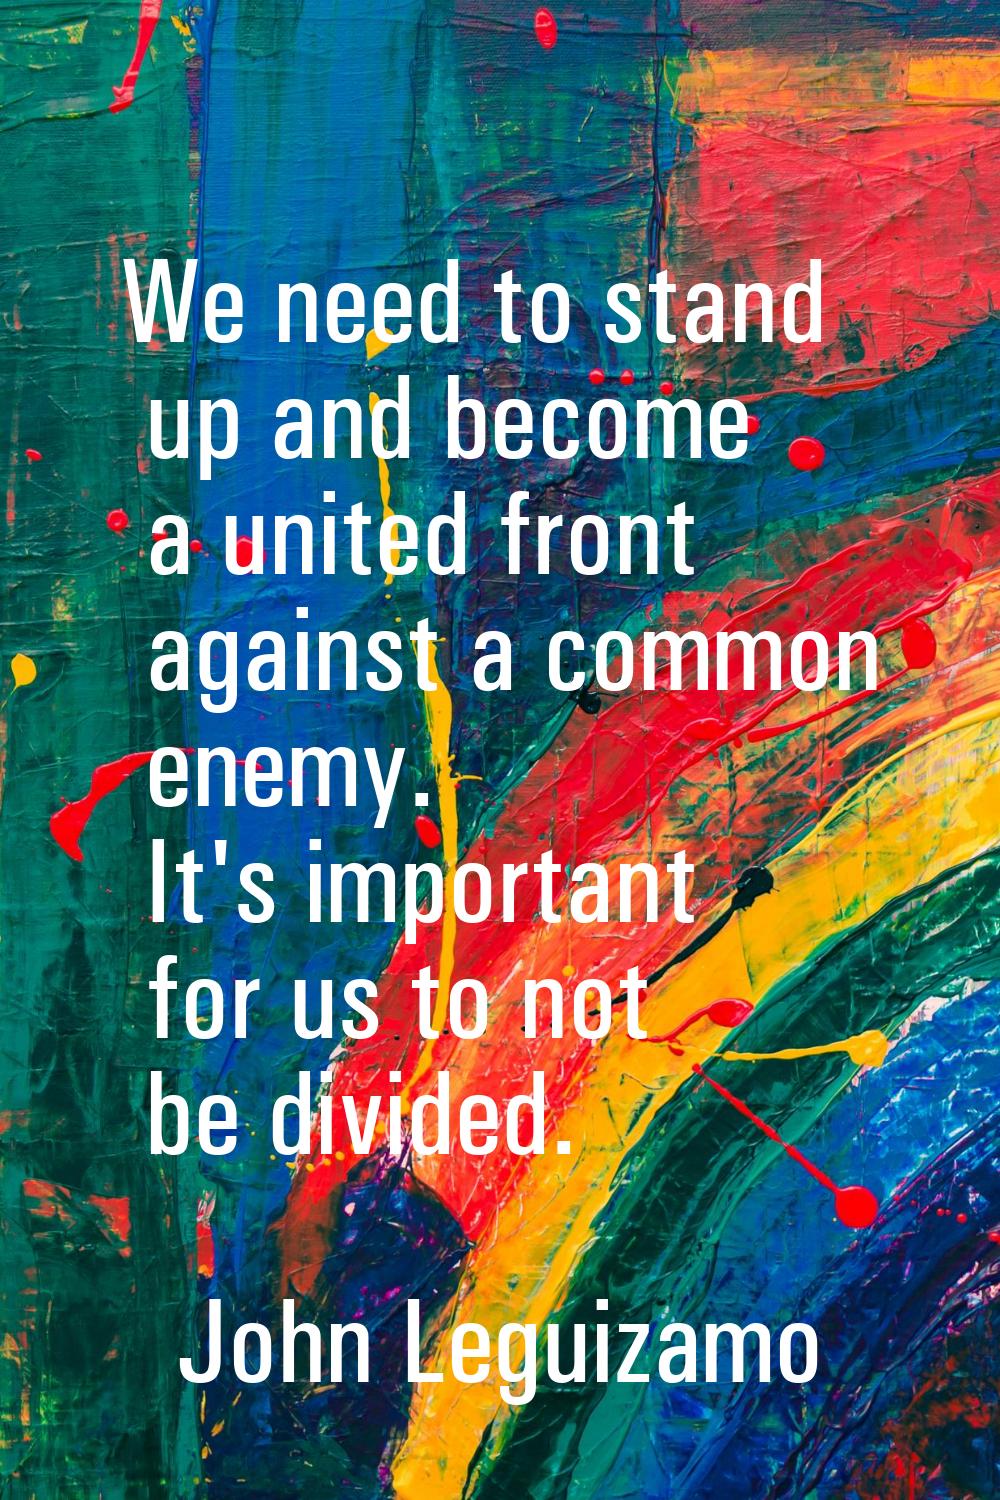 We need to stand up and become a united front against a common enemy. It's important for us to not 